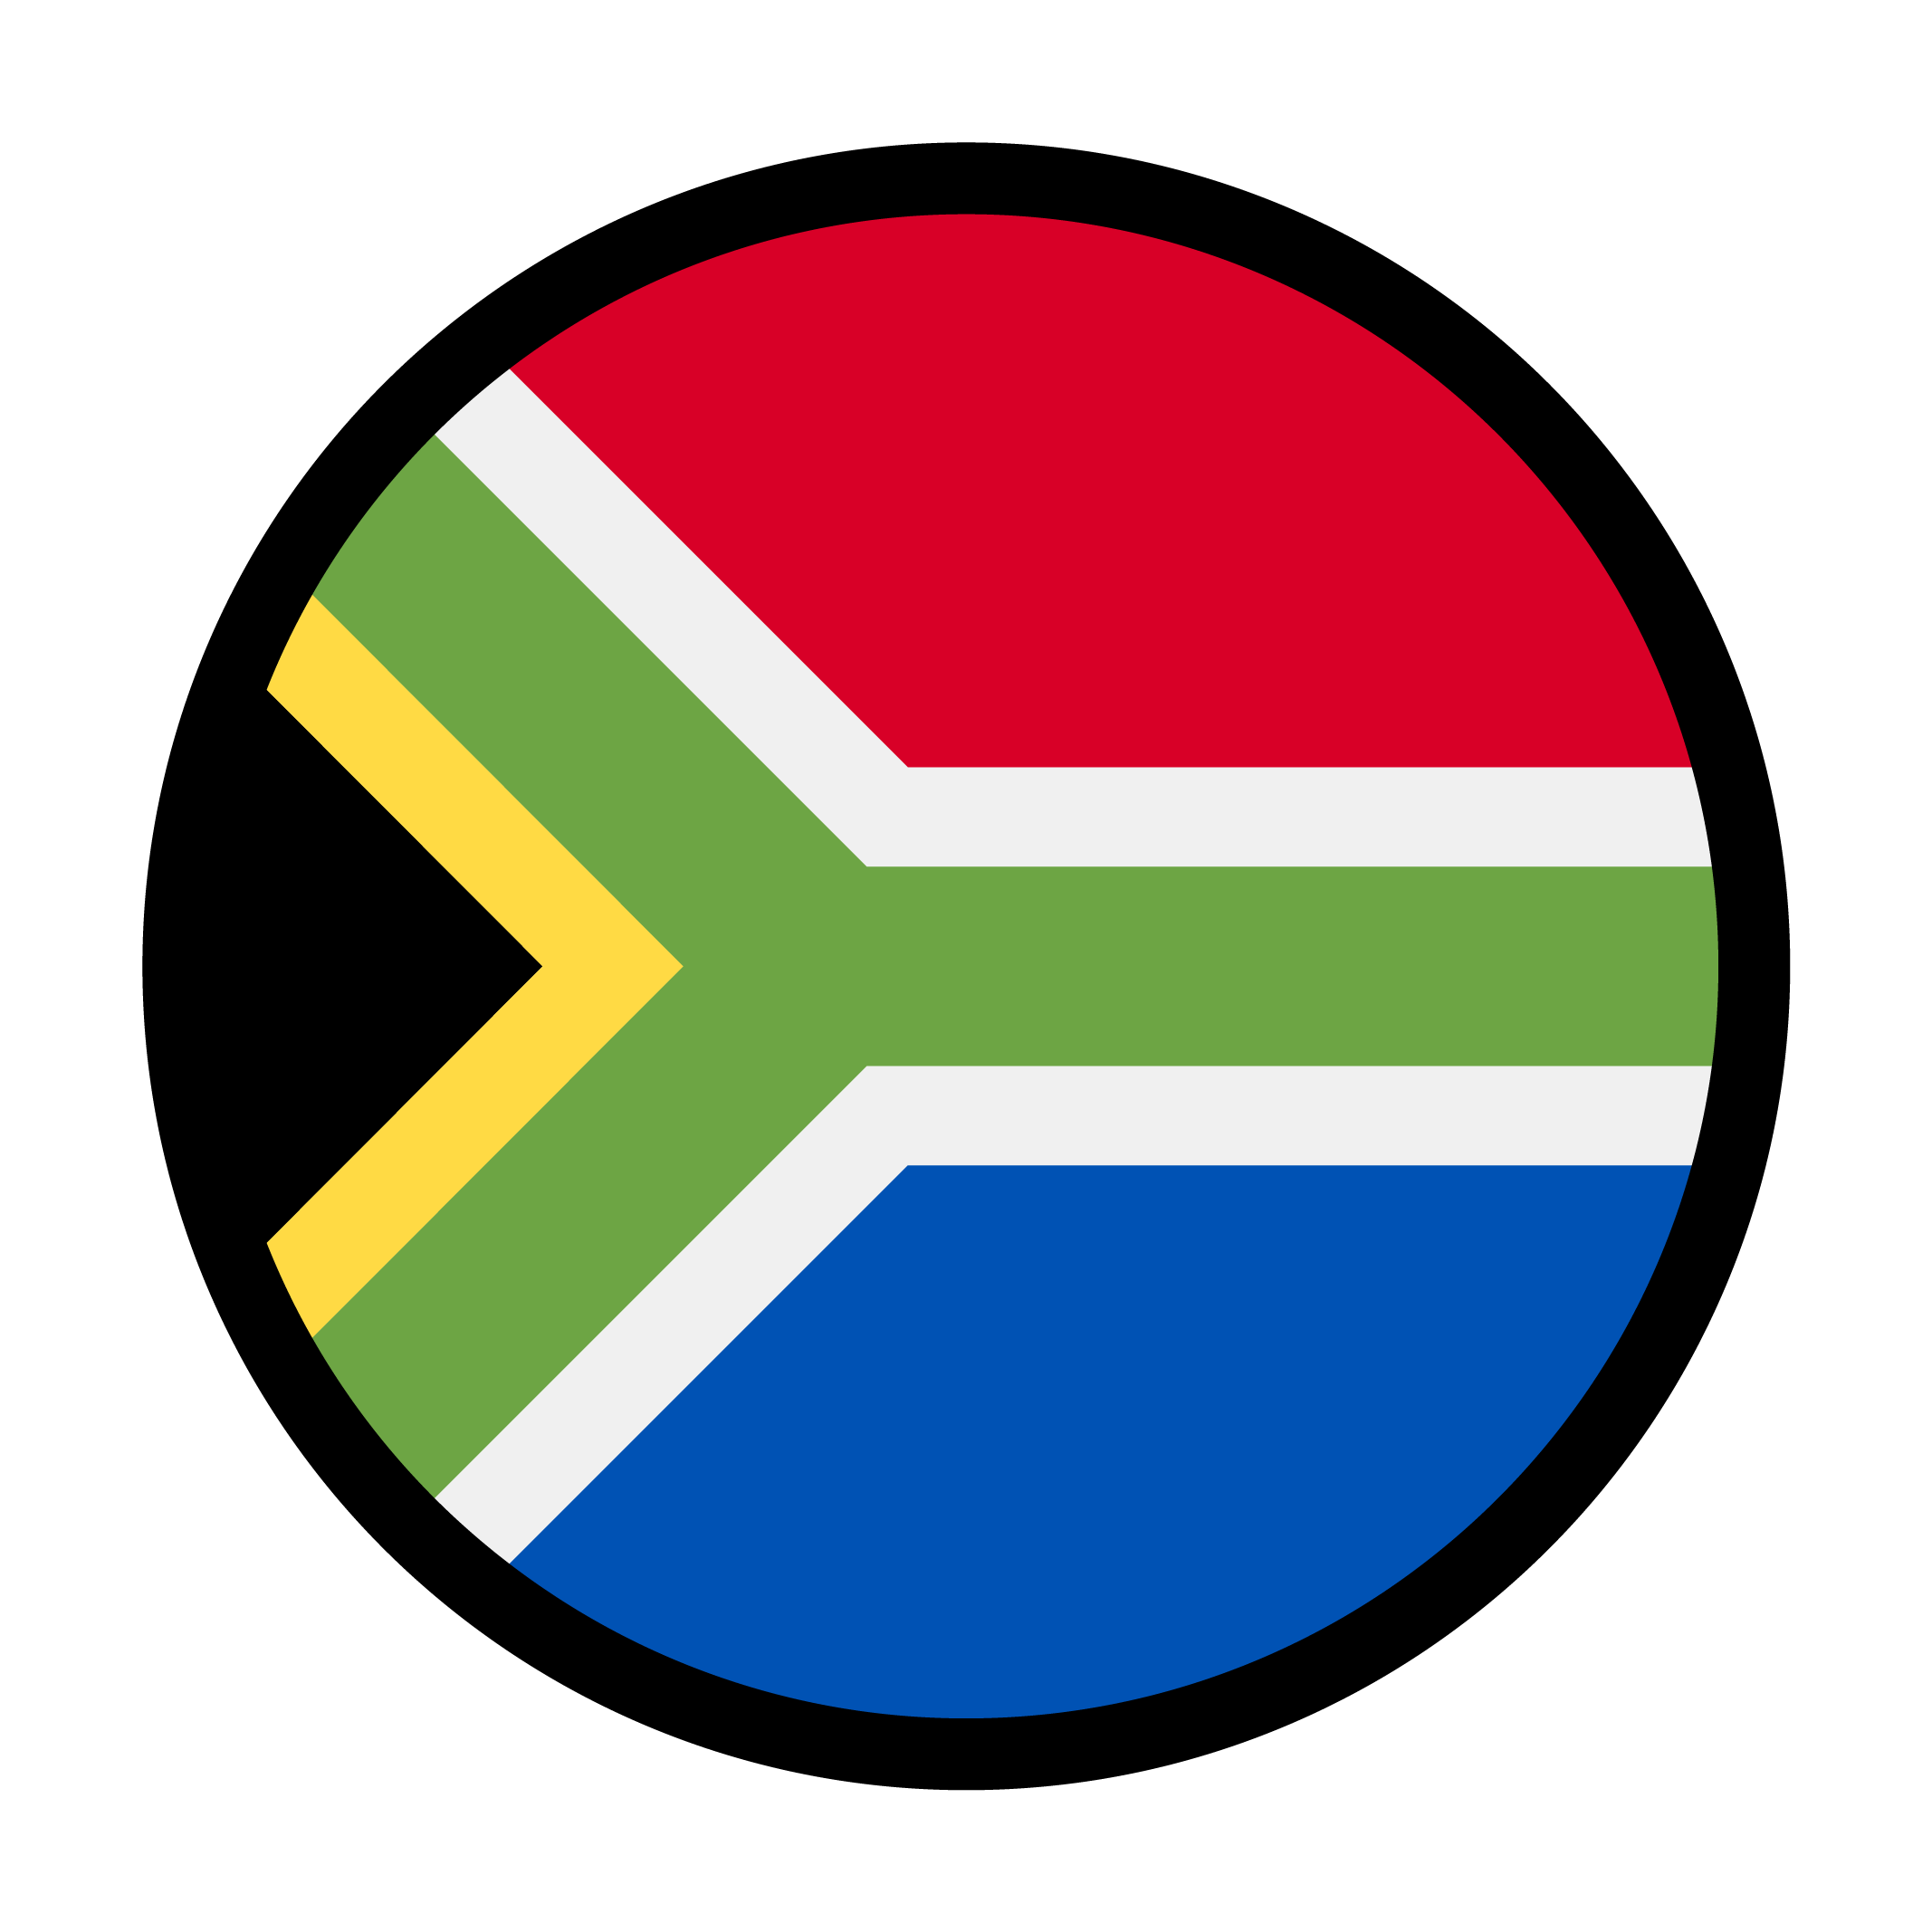 SOUTH AFRICA ICON